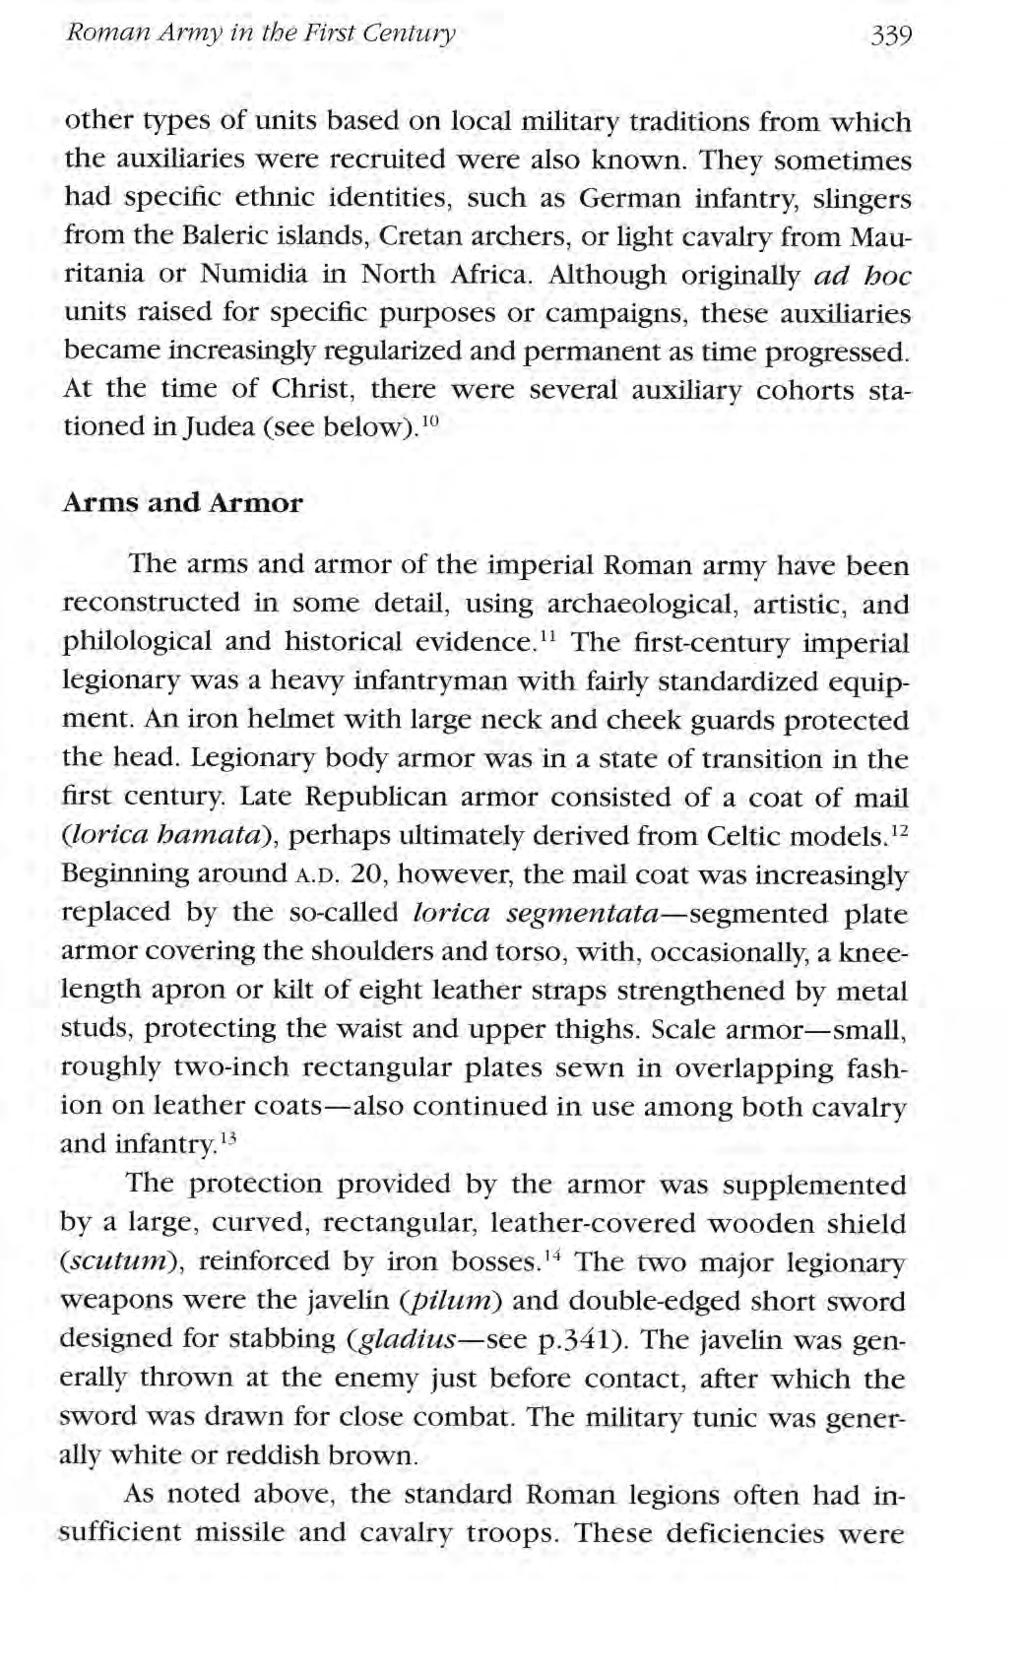 Hamblin: The Roman Army in the First Century roman army in the first century 339 other types of units based on local military traditions from which the auxiliaries were recruited were also known they